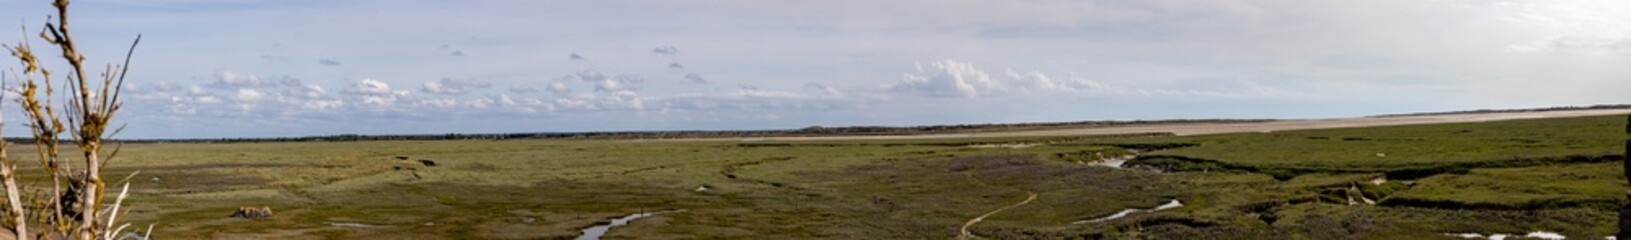 Panorama of a salt marsh in Normandy